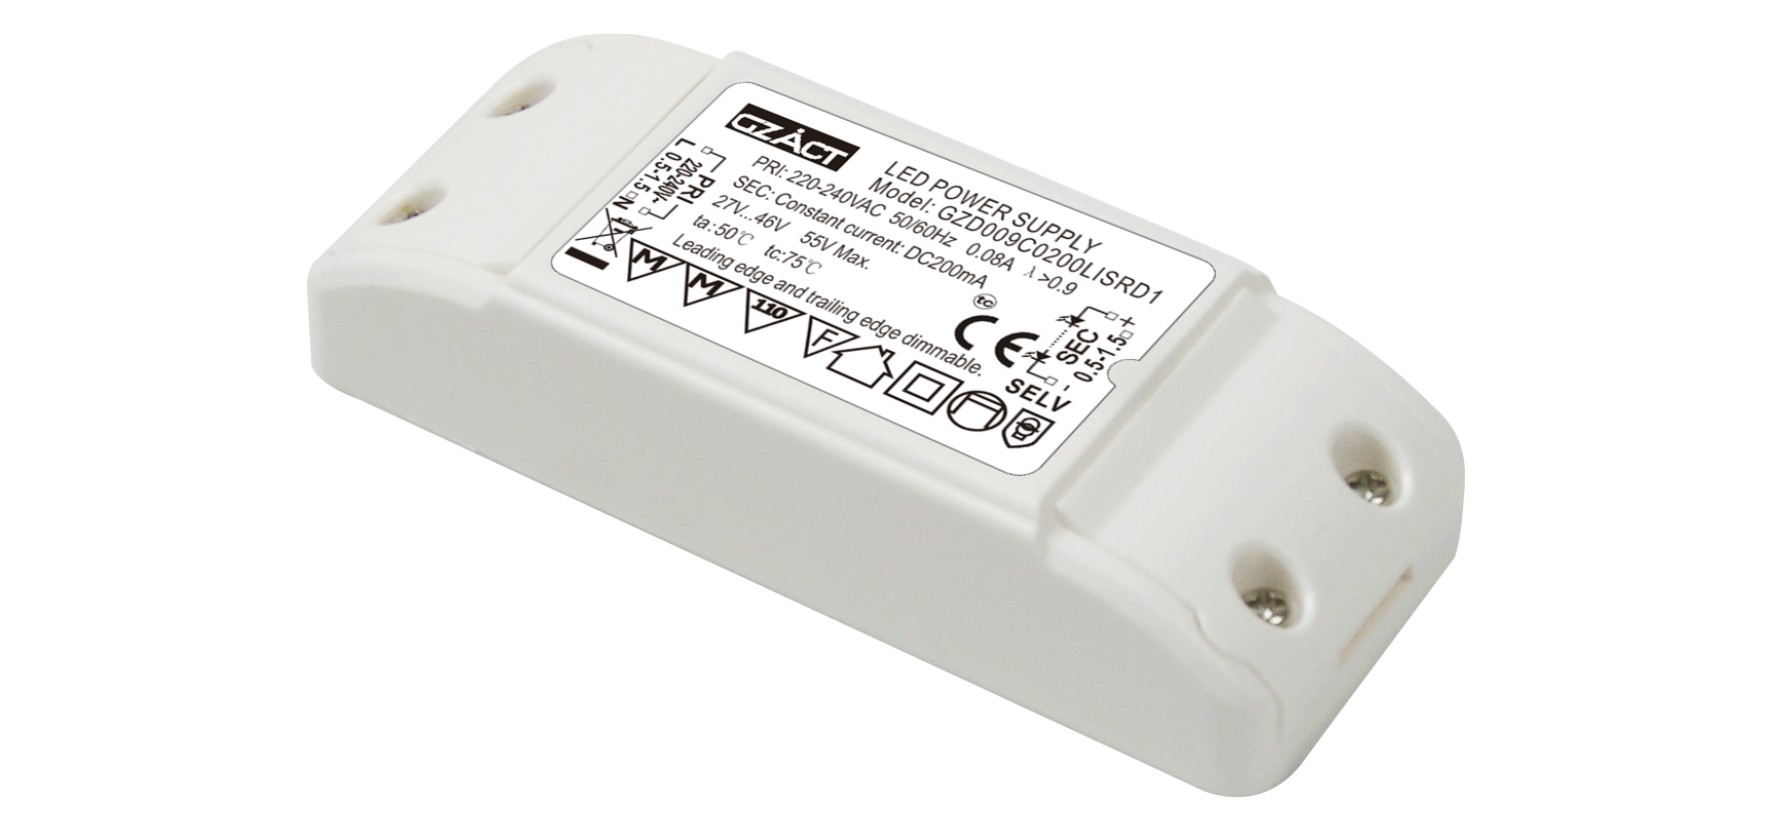 Chinese switching power supply 9w triac led driver dimmable 300ma